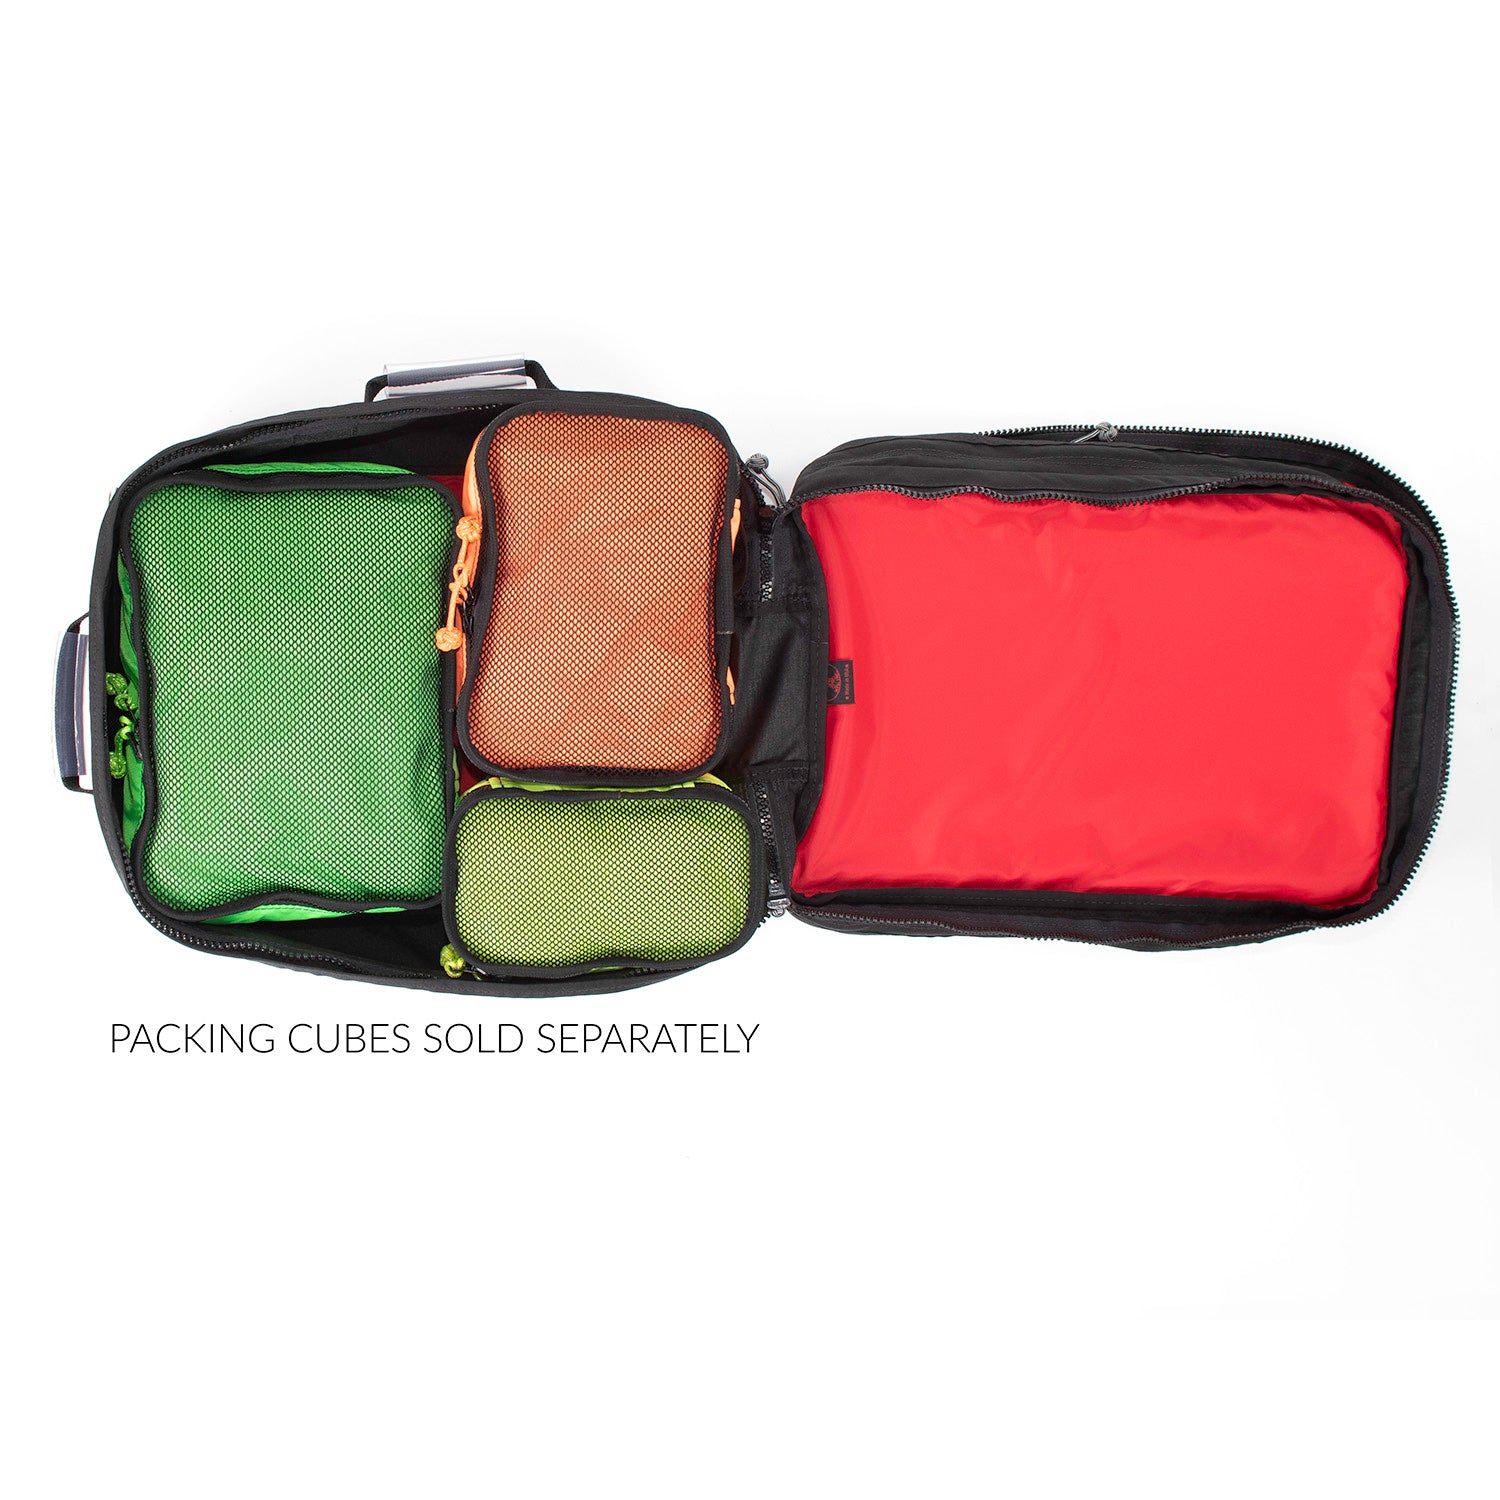 Main compartment with Red Oxx packing cubes sold separately. 